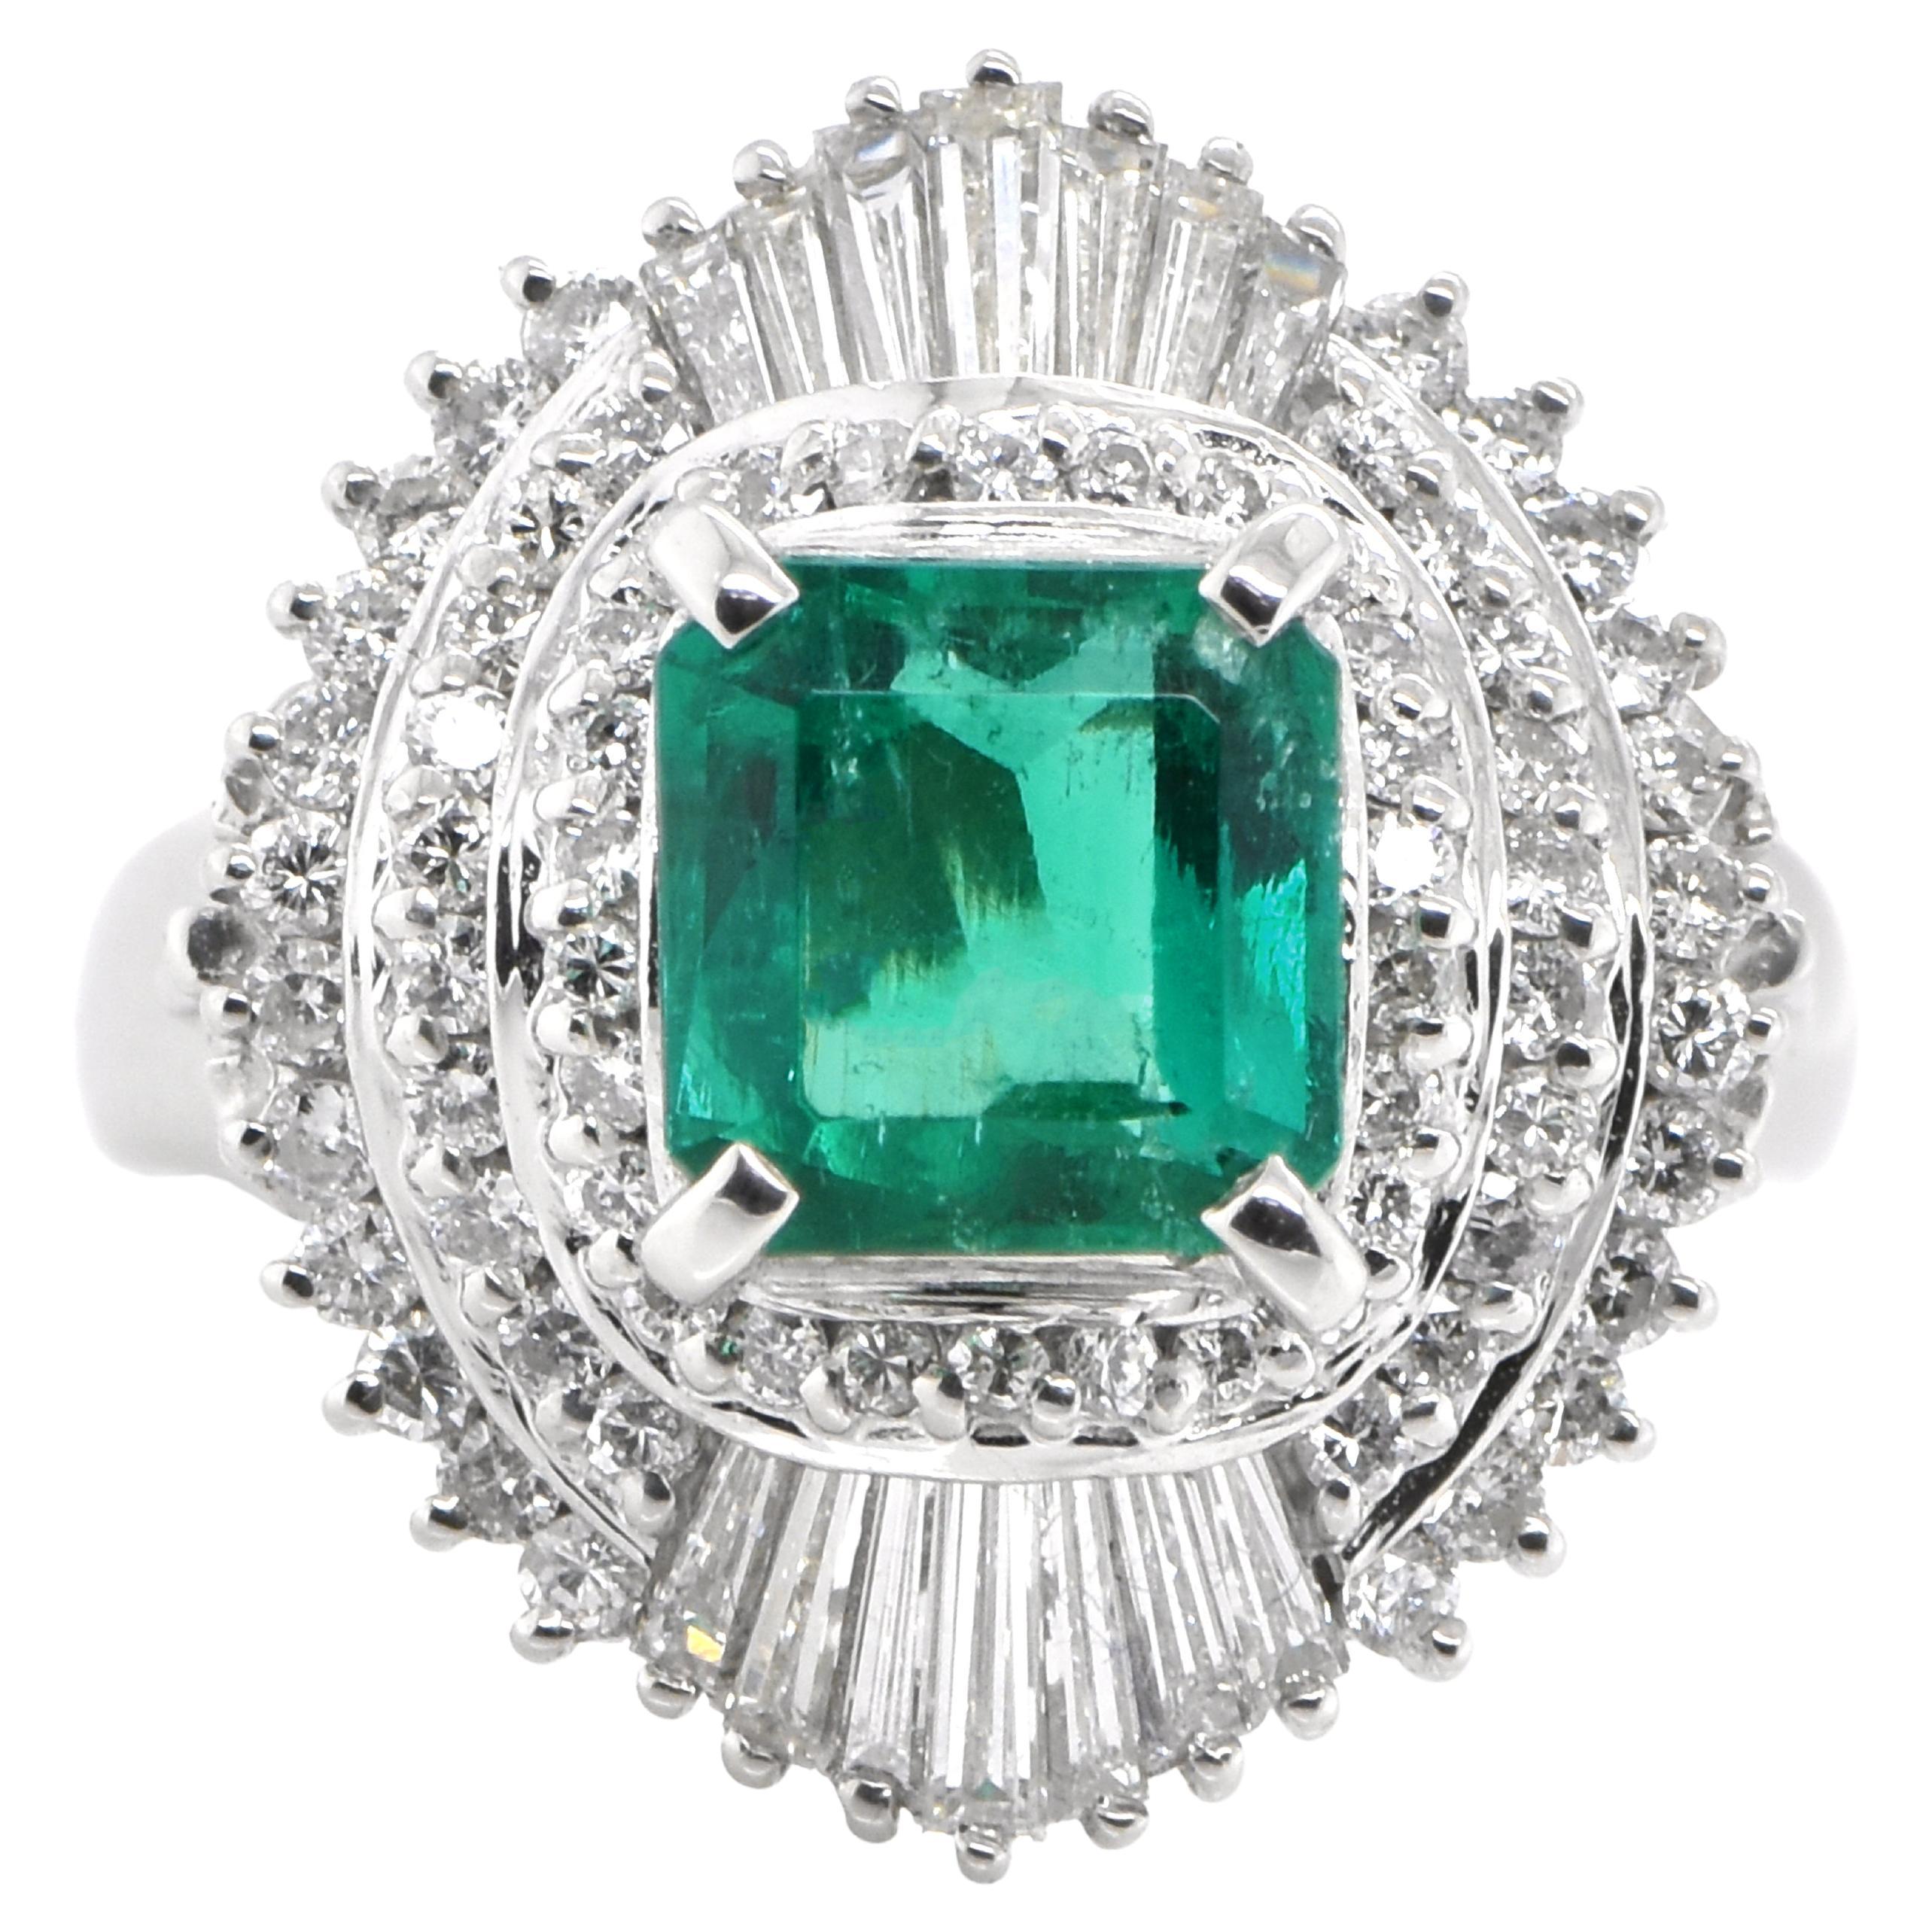  1.60 Carat Natural Emerald and Diamond Ring Set in Platinum For Sale